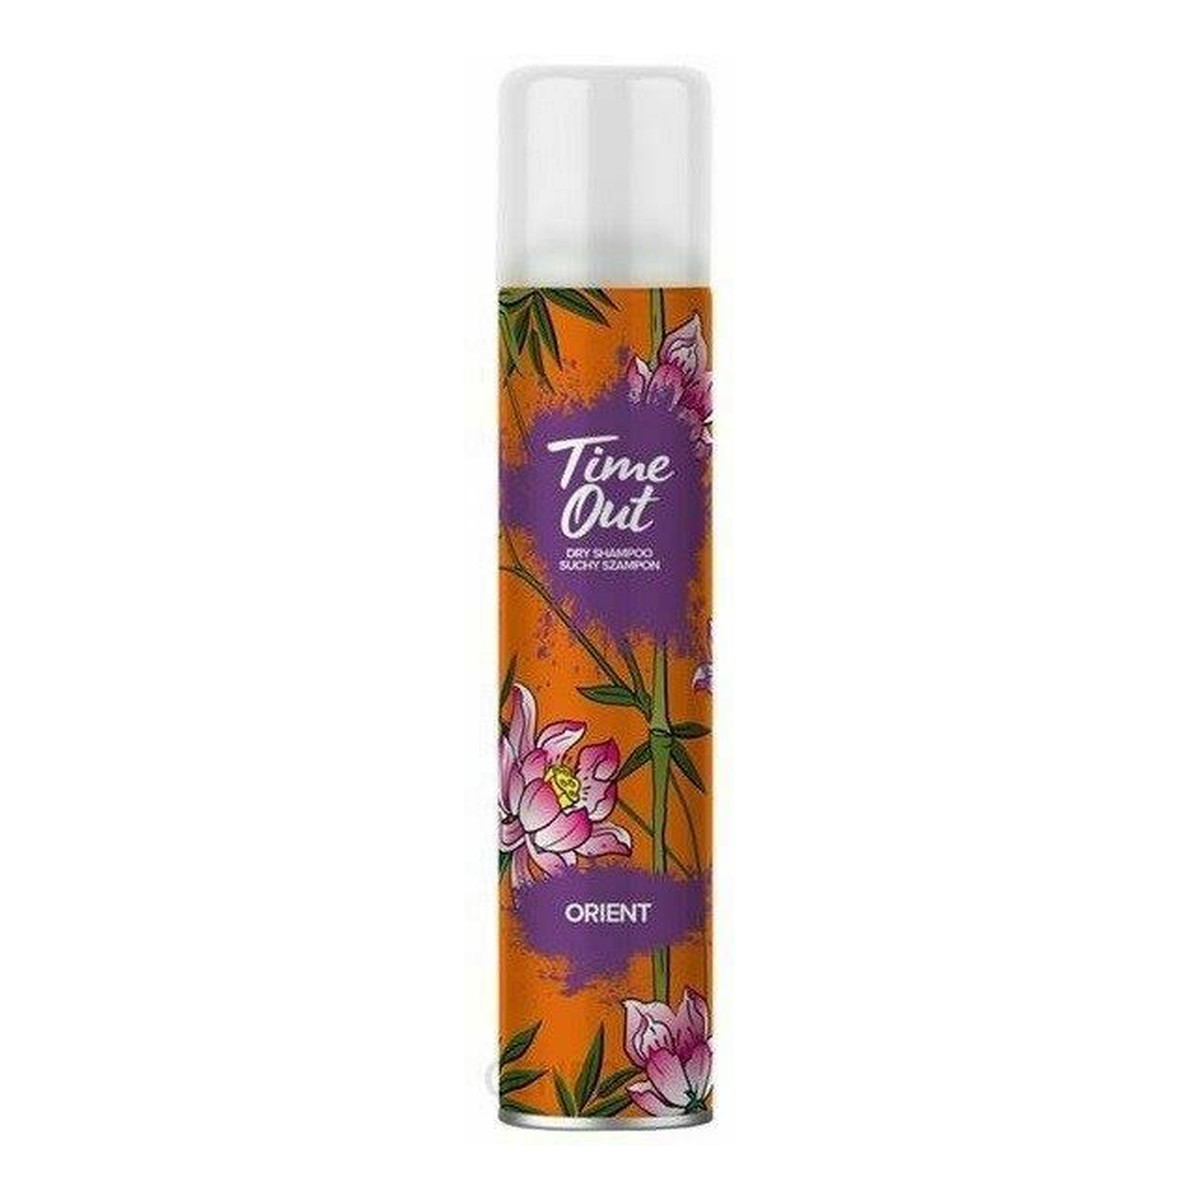 TIME OUT ORIENT Dry Hair Shampoo szampon do wlosow suchych 75ml